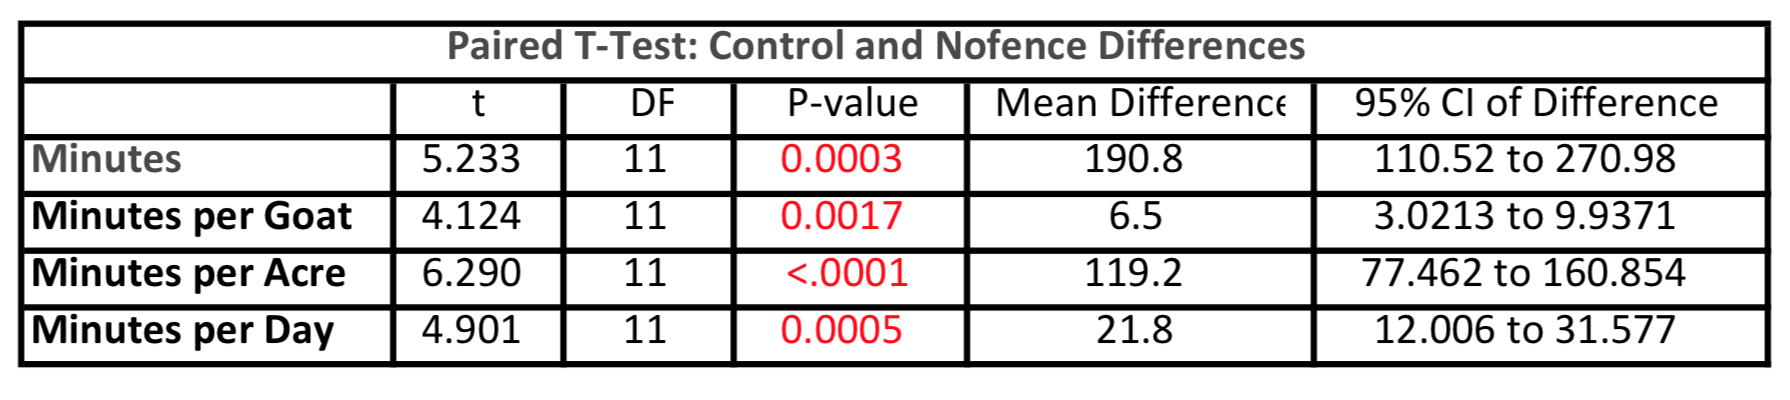 Paired t test: Control and Nofence Differences